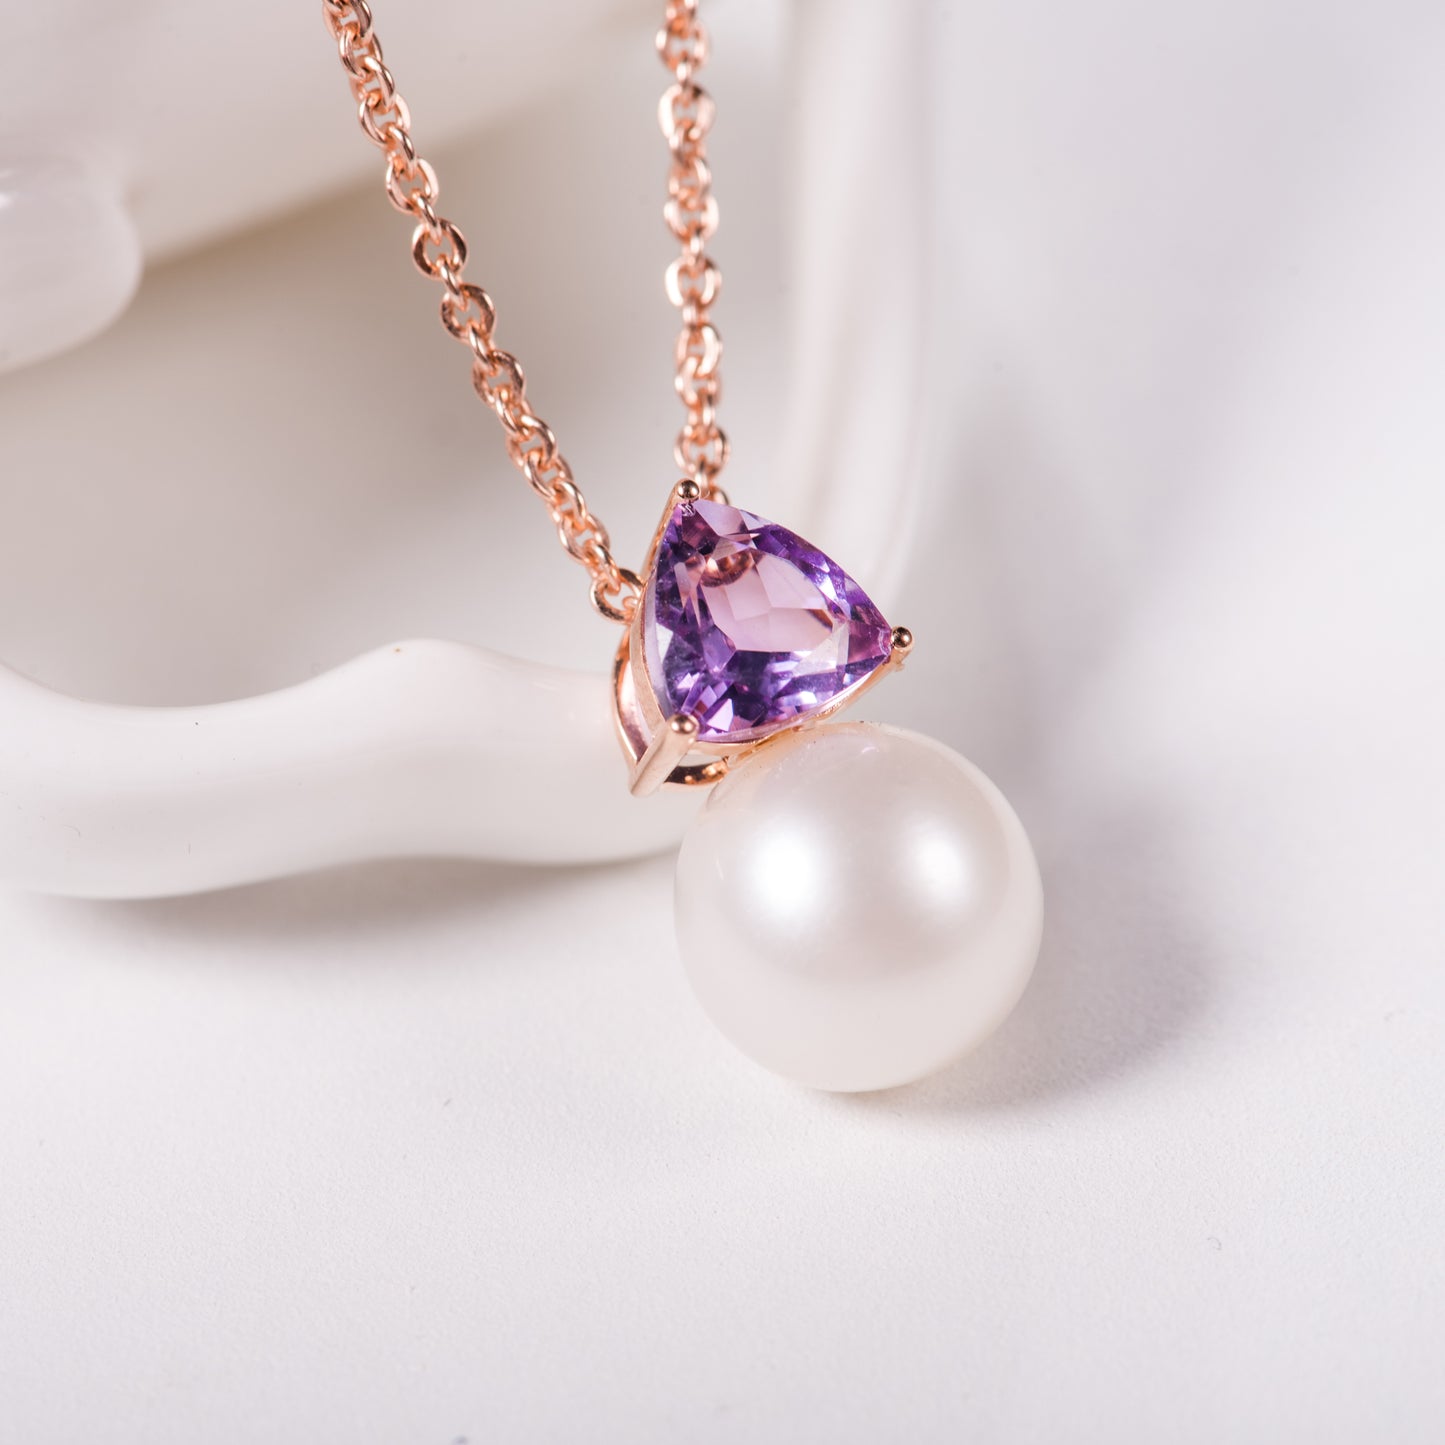 Pearl pendant with amethyst